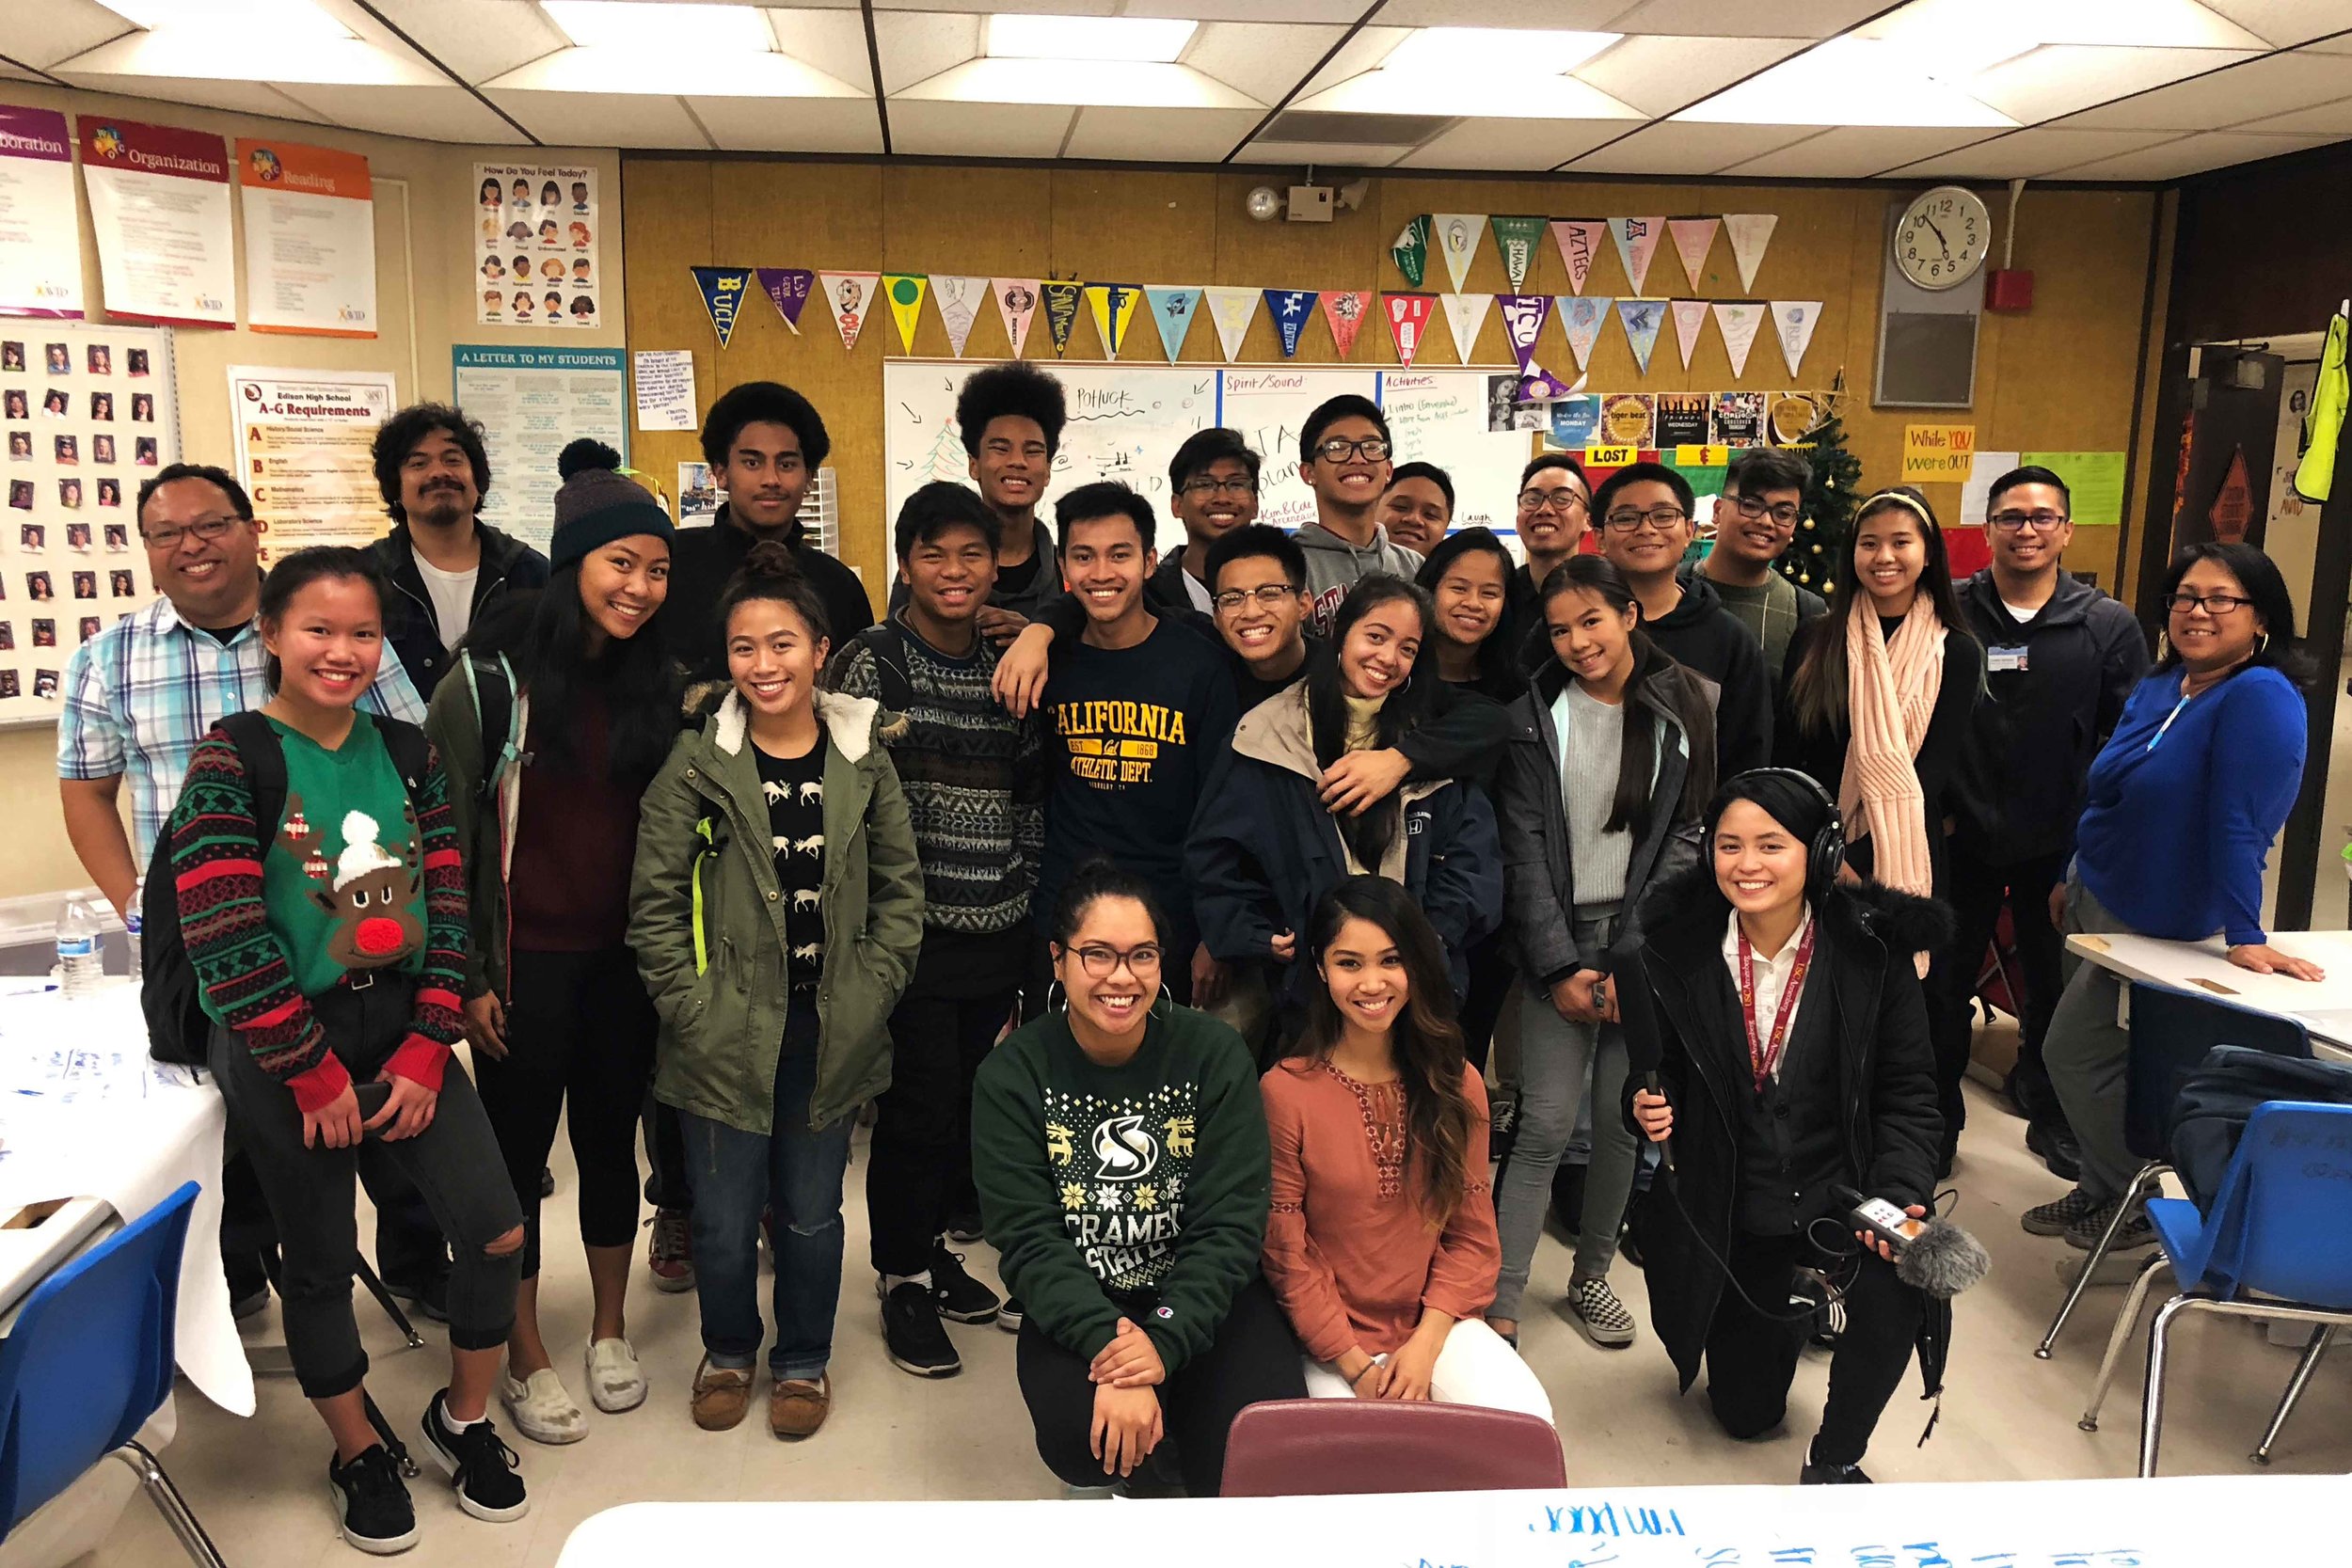  The students and teachers of the Little Manila After School Program at Edison High School in Stockton, California. Host and producer Paola Mardo and co-producer Patrick Epino are also pictured. Courtesy of LMASP. 